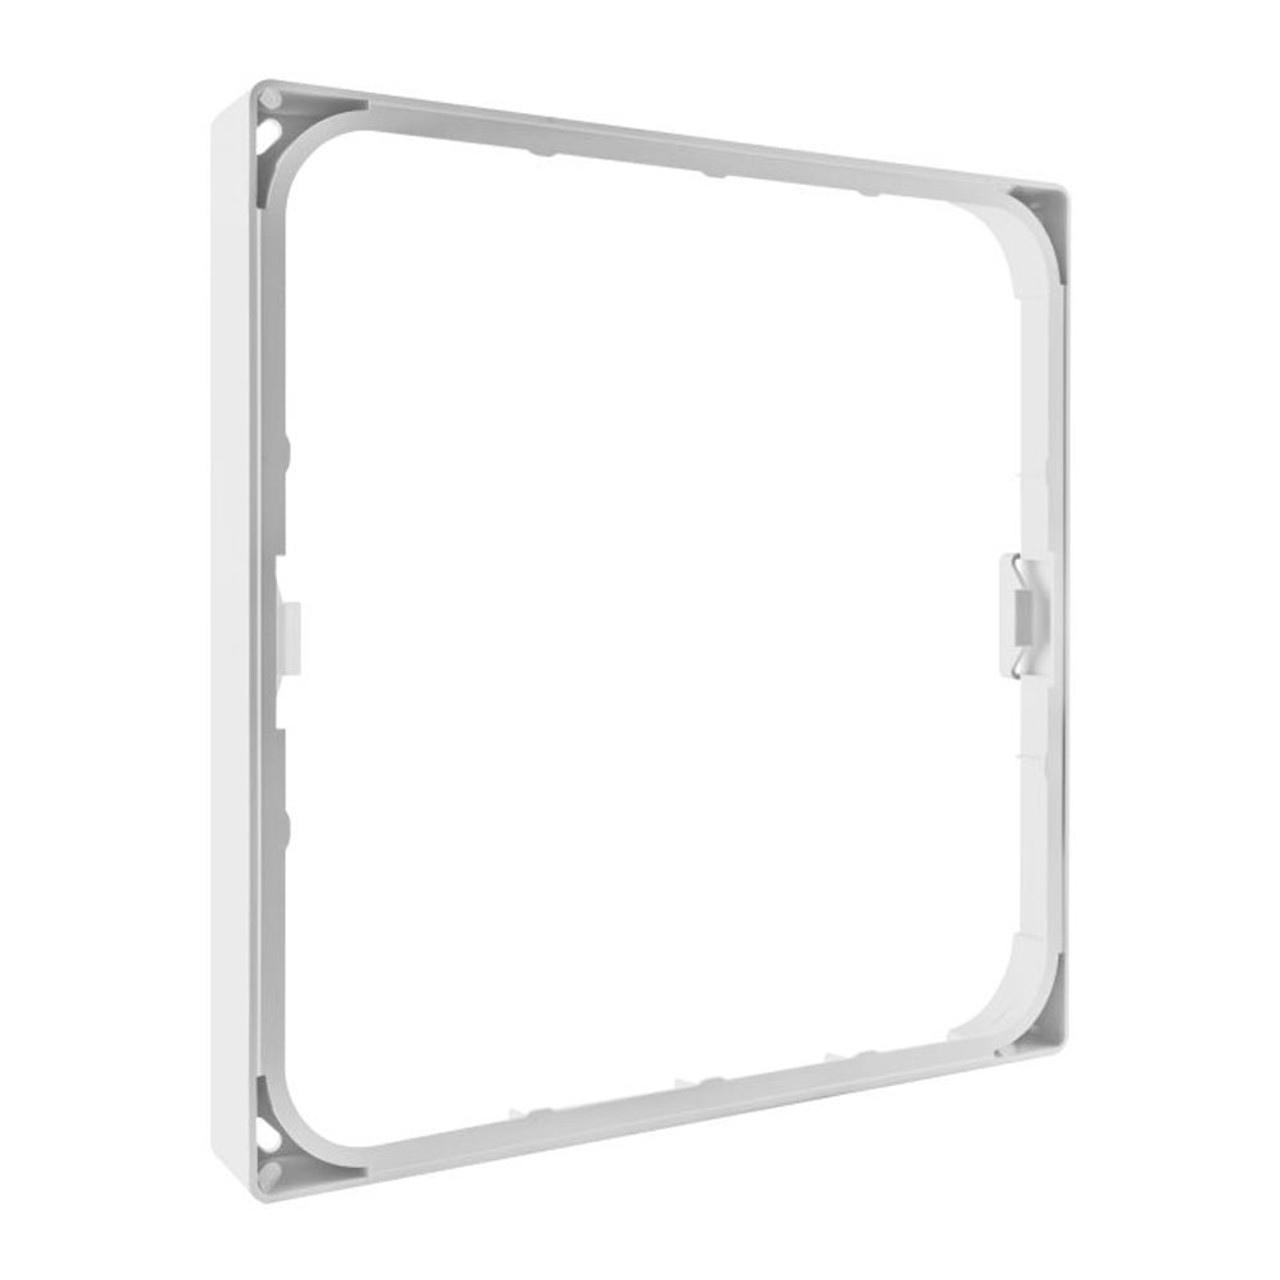 White Square Frame for 105mm x 105mm Cut Out Ledvance Downlight